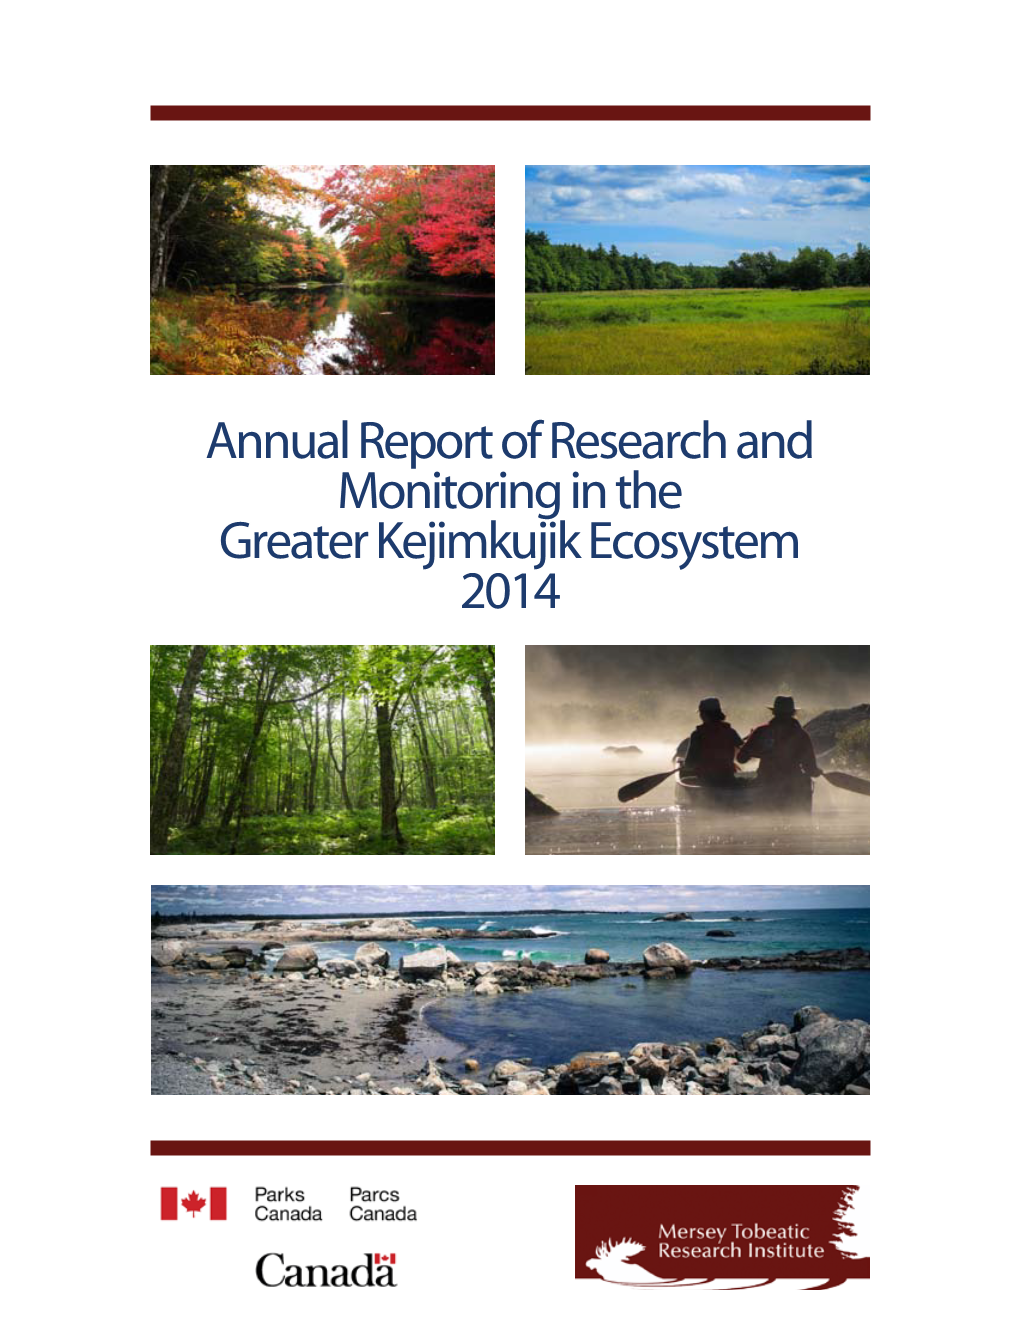 Annual Report of Research and Monitoring in the Greater Kejimkujik Ecosystem 2014 Citation: Mersey Tobeatic Research Institute and Parks Canada